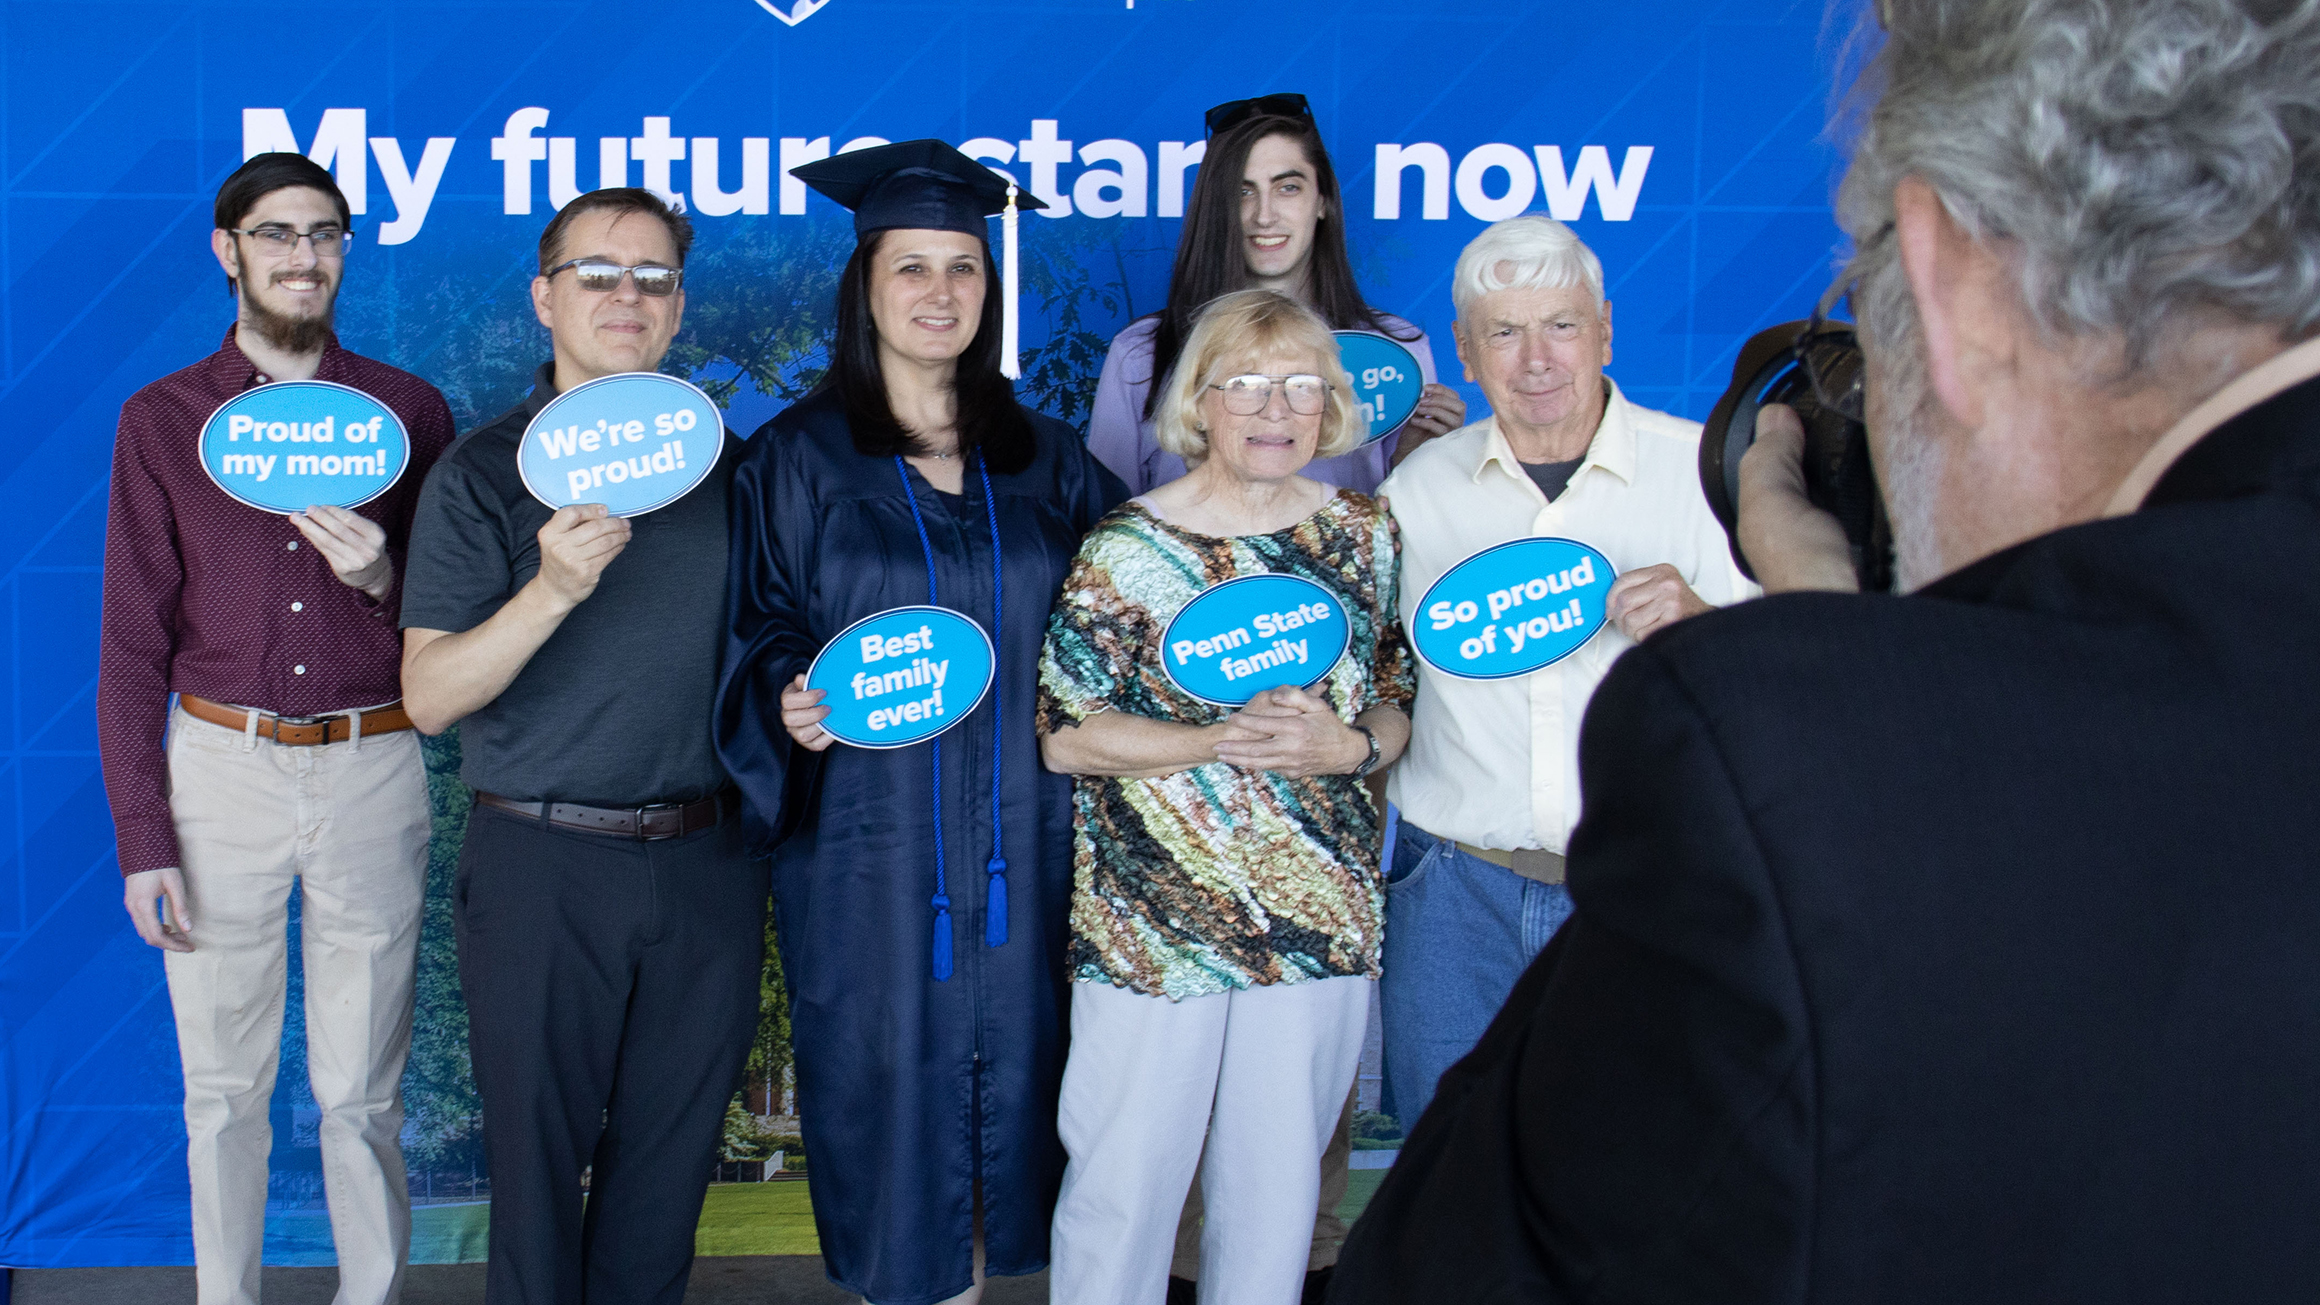 A photographer takes a picture of a family with a grad in a cap and gown.